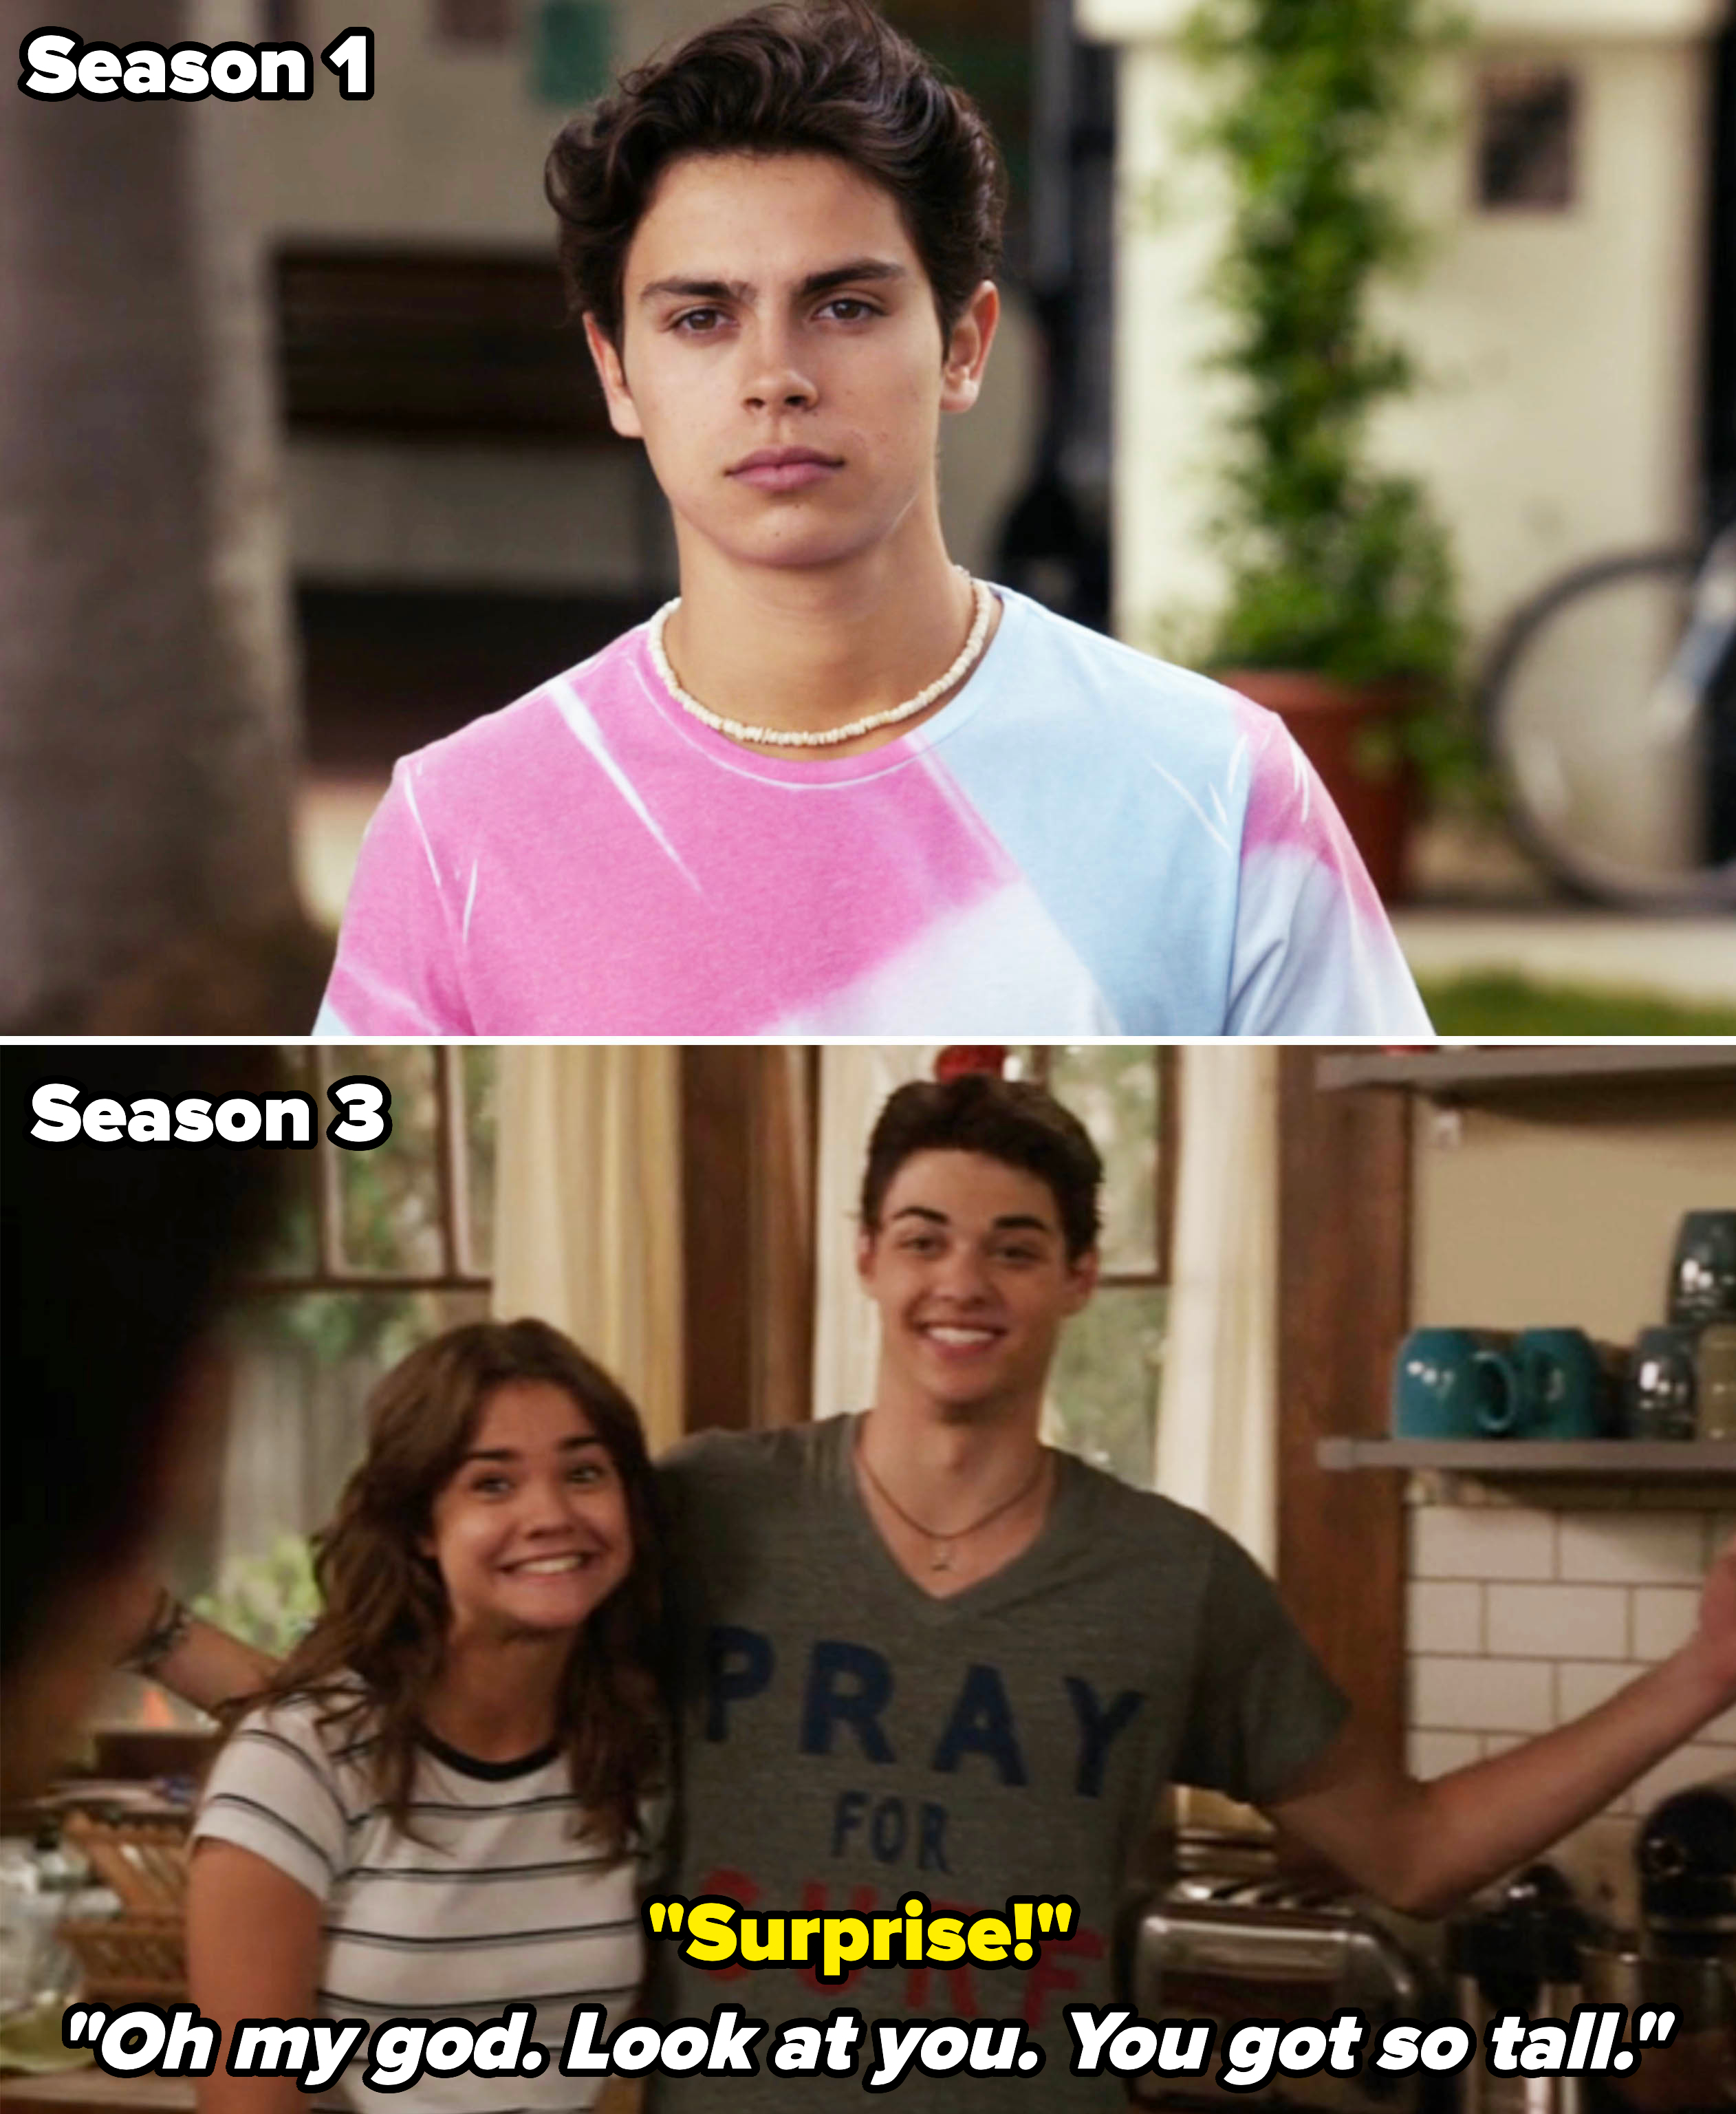 Jake T Austin as Jesus in The Fosters vs Noah Centineo as Jesus and his family remarking on how tall he&#x27;s gotten